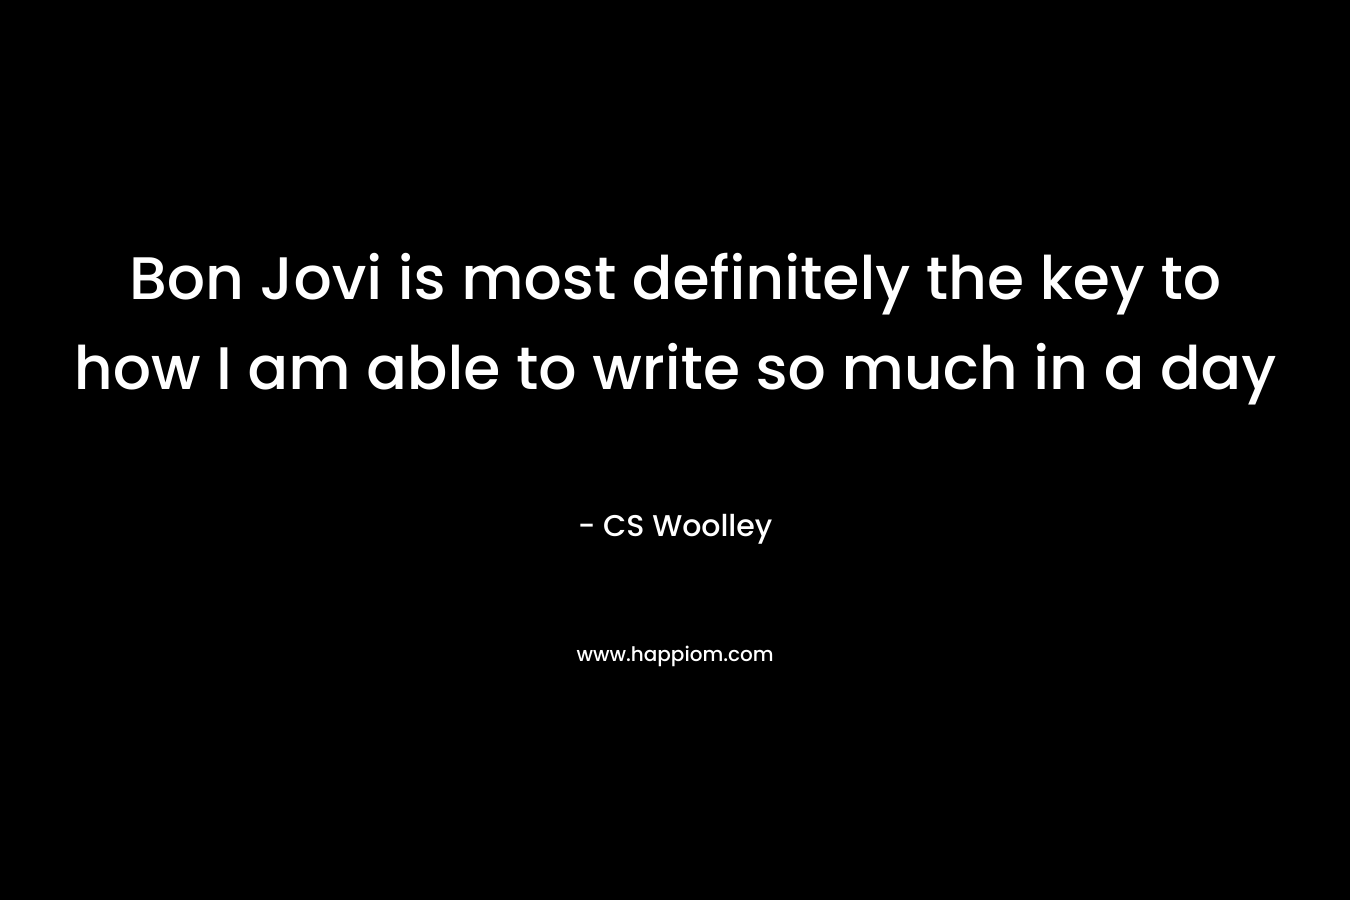 Bon Jovi is most definitely the key to how I am able to write so much in a day – CS Woolley